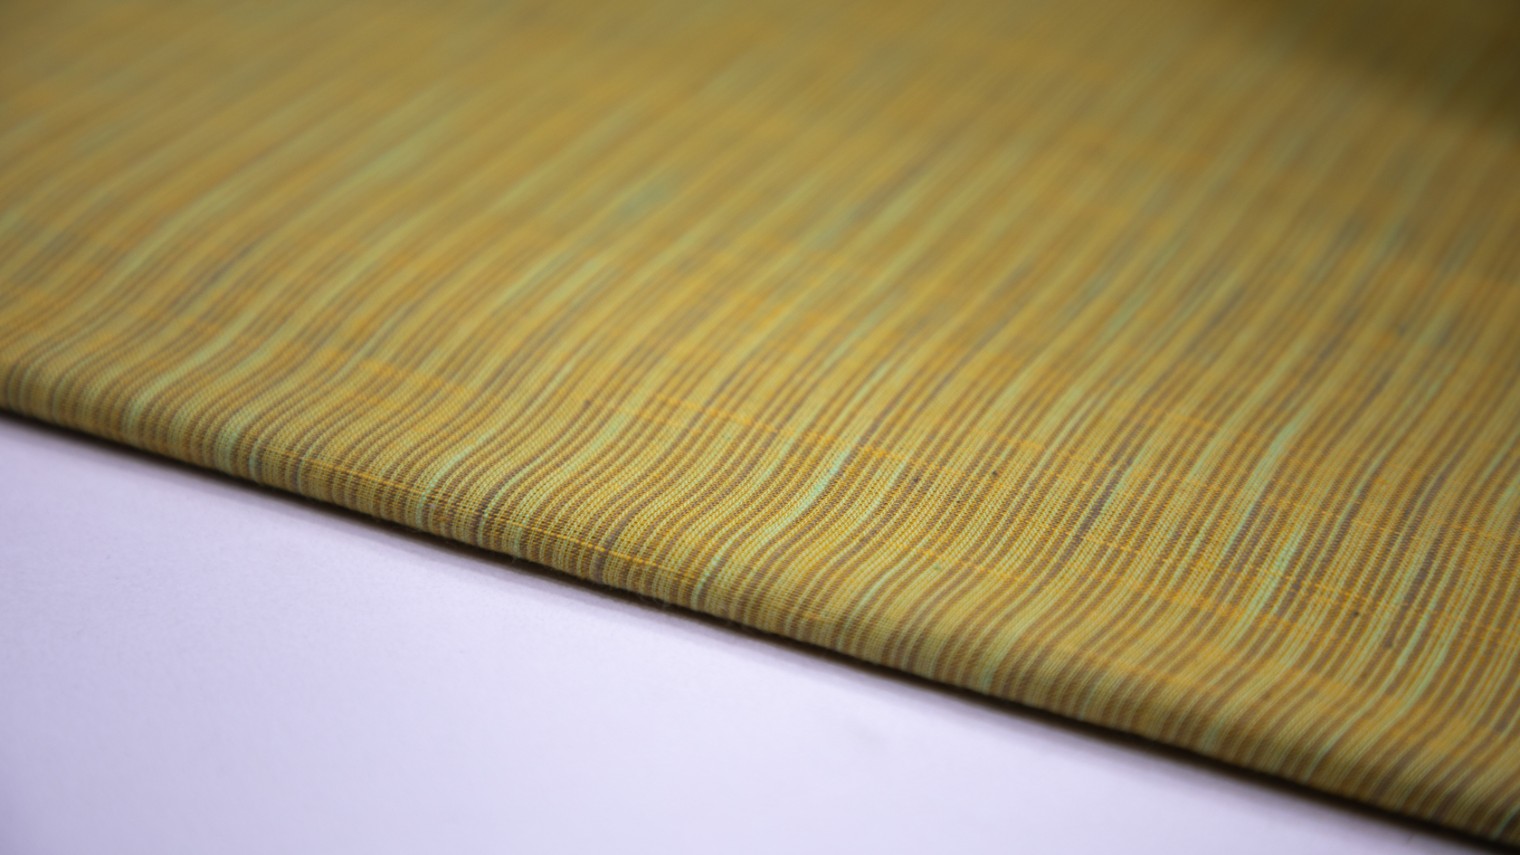 LIME DELIGHT TWO TONE GREEN COLOR SOUTH COTTON HANDLOOM THIN STRIPES WEAVE FABRIC - 4321